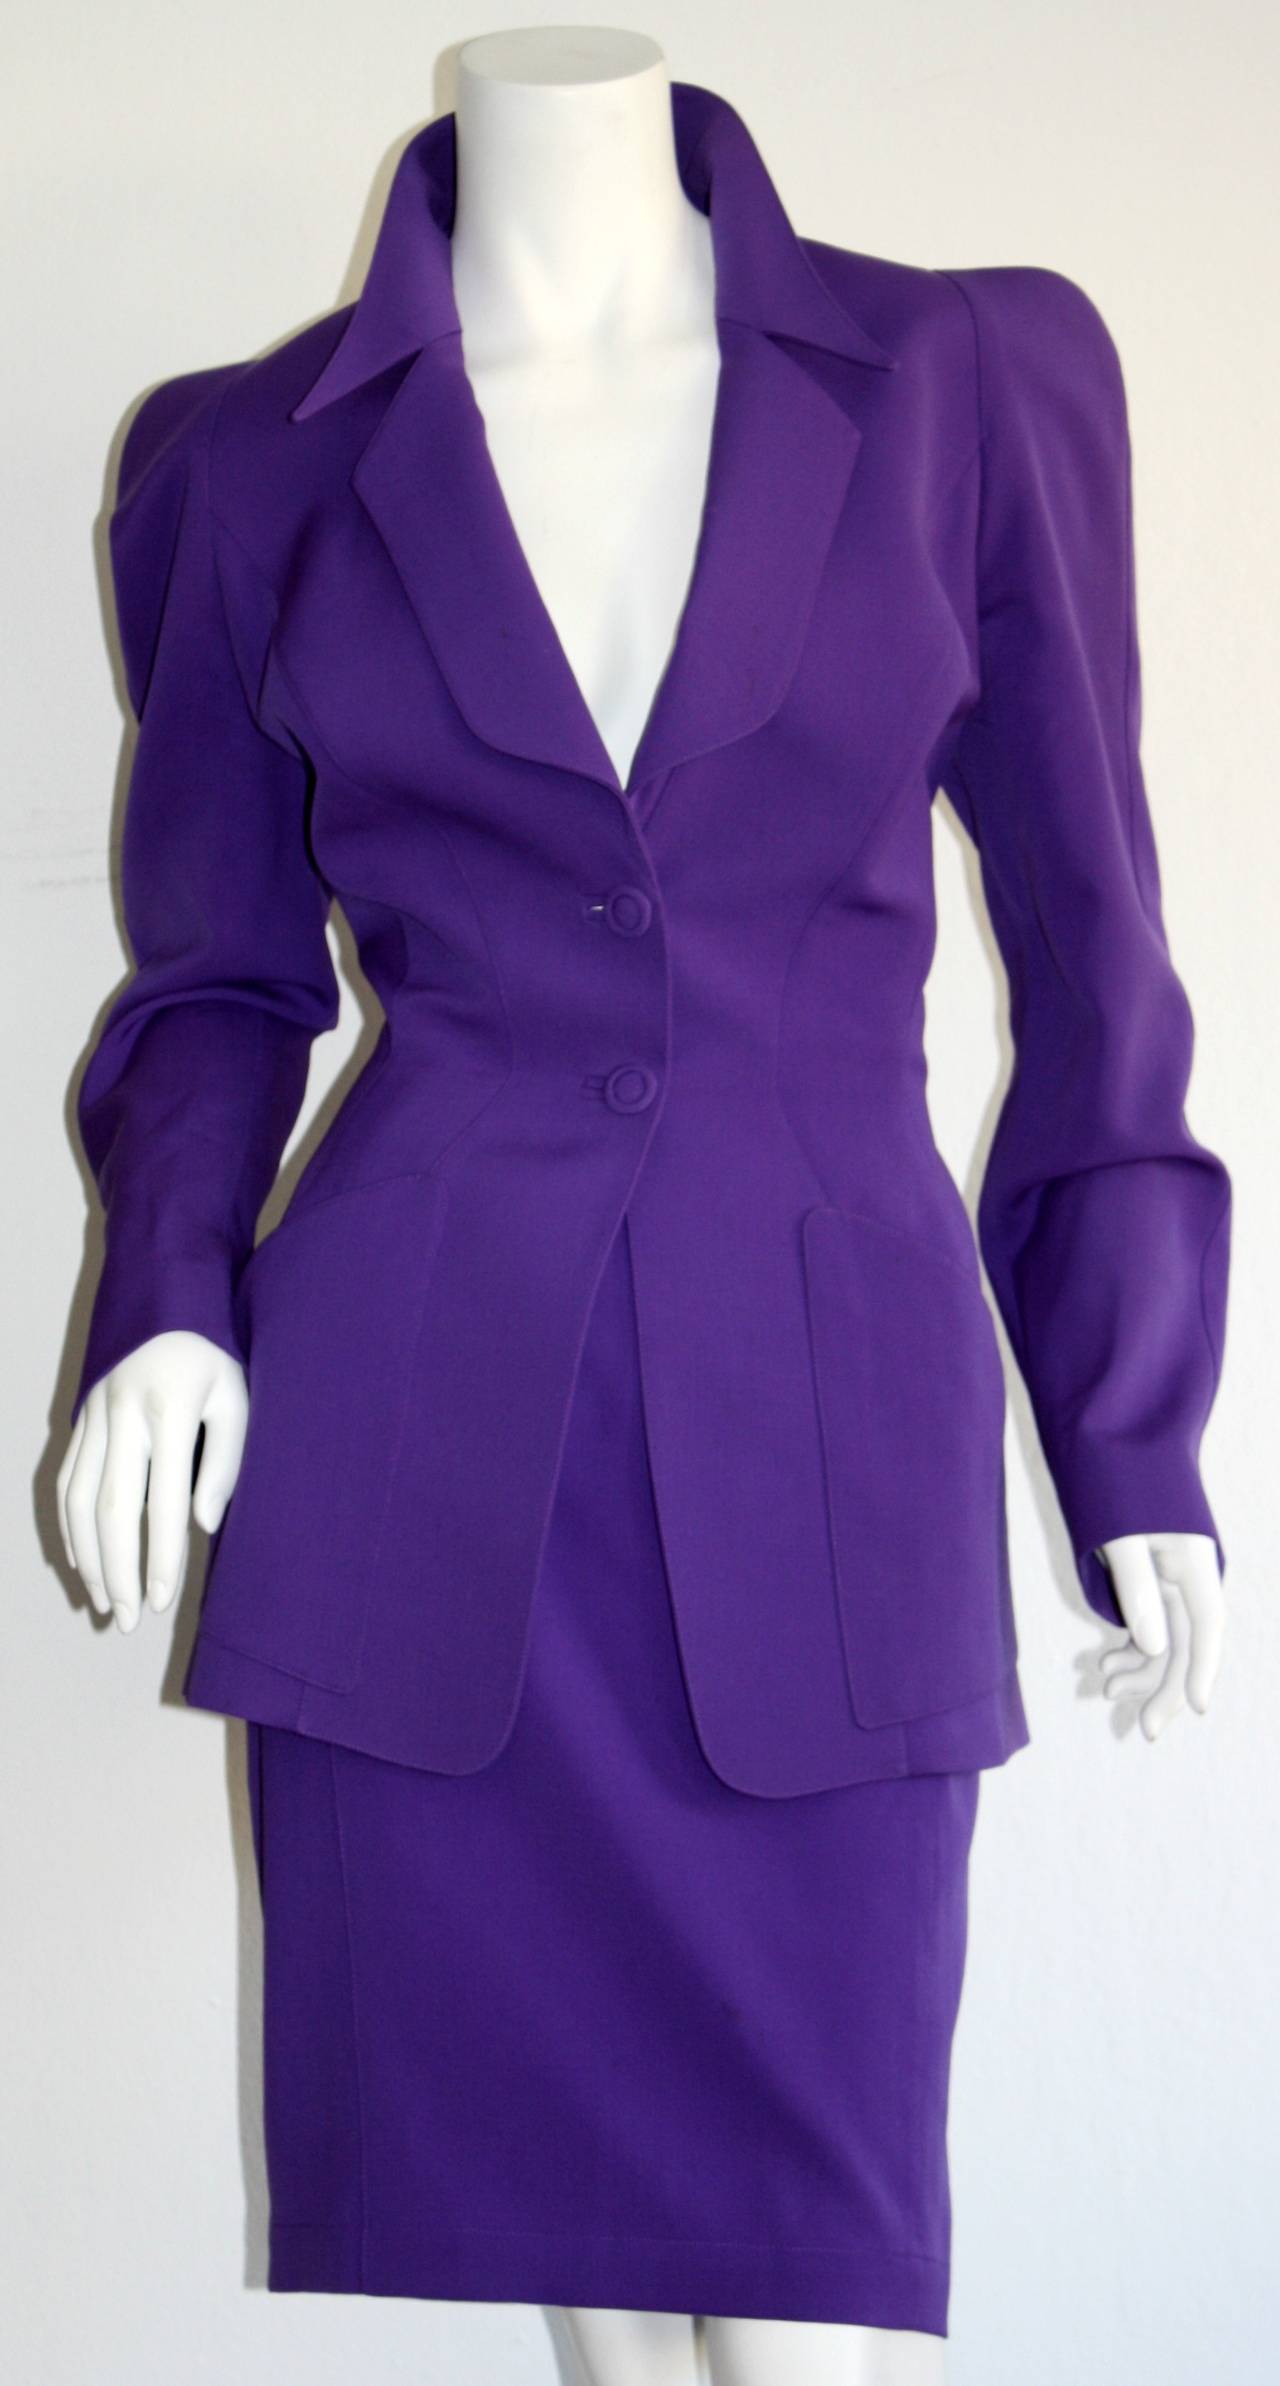 Stunning vintage Thierry Mugler vibrant purple skirt suit! Signature Mugler lapels, with a figure flattering high waist pencil skirt. Perfect for the office, or for an event. Both pieces also work fantastic as separates! Fully lined. In great